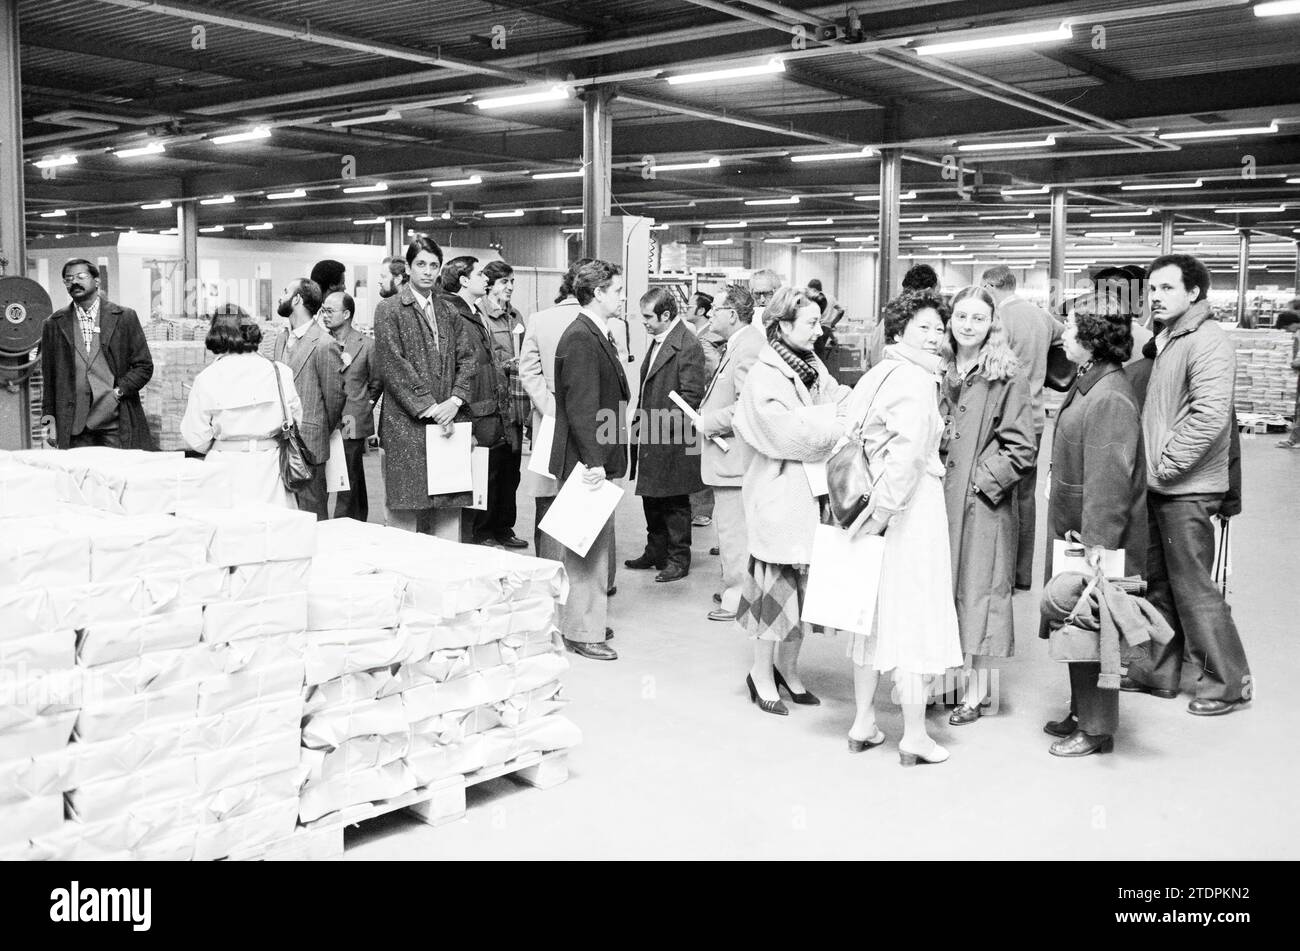 Third World people at Nietra VNA, Nieuwegein, VNU Association of Dutch Publishers, Nieuwegein, 29-03-1982, Whizgle News from the Past, Tailored for the Future. Explore historical narratives, Dutch The Netherlands agency image with a modern perspective, bridging the gap between yesterday's events and tomorrow's insights. A timeless journey shaping the stories that shape our future Stock Photo